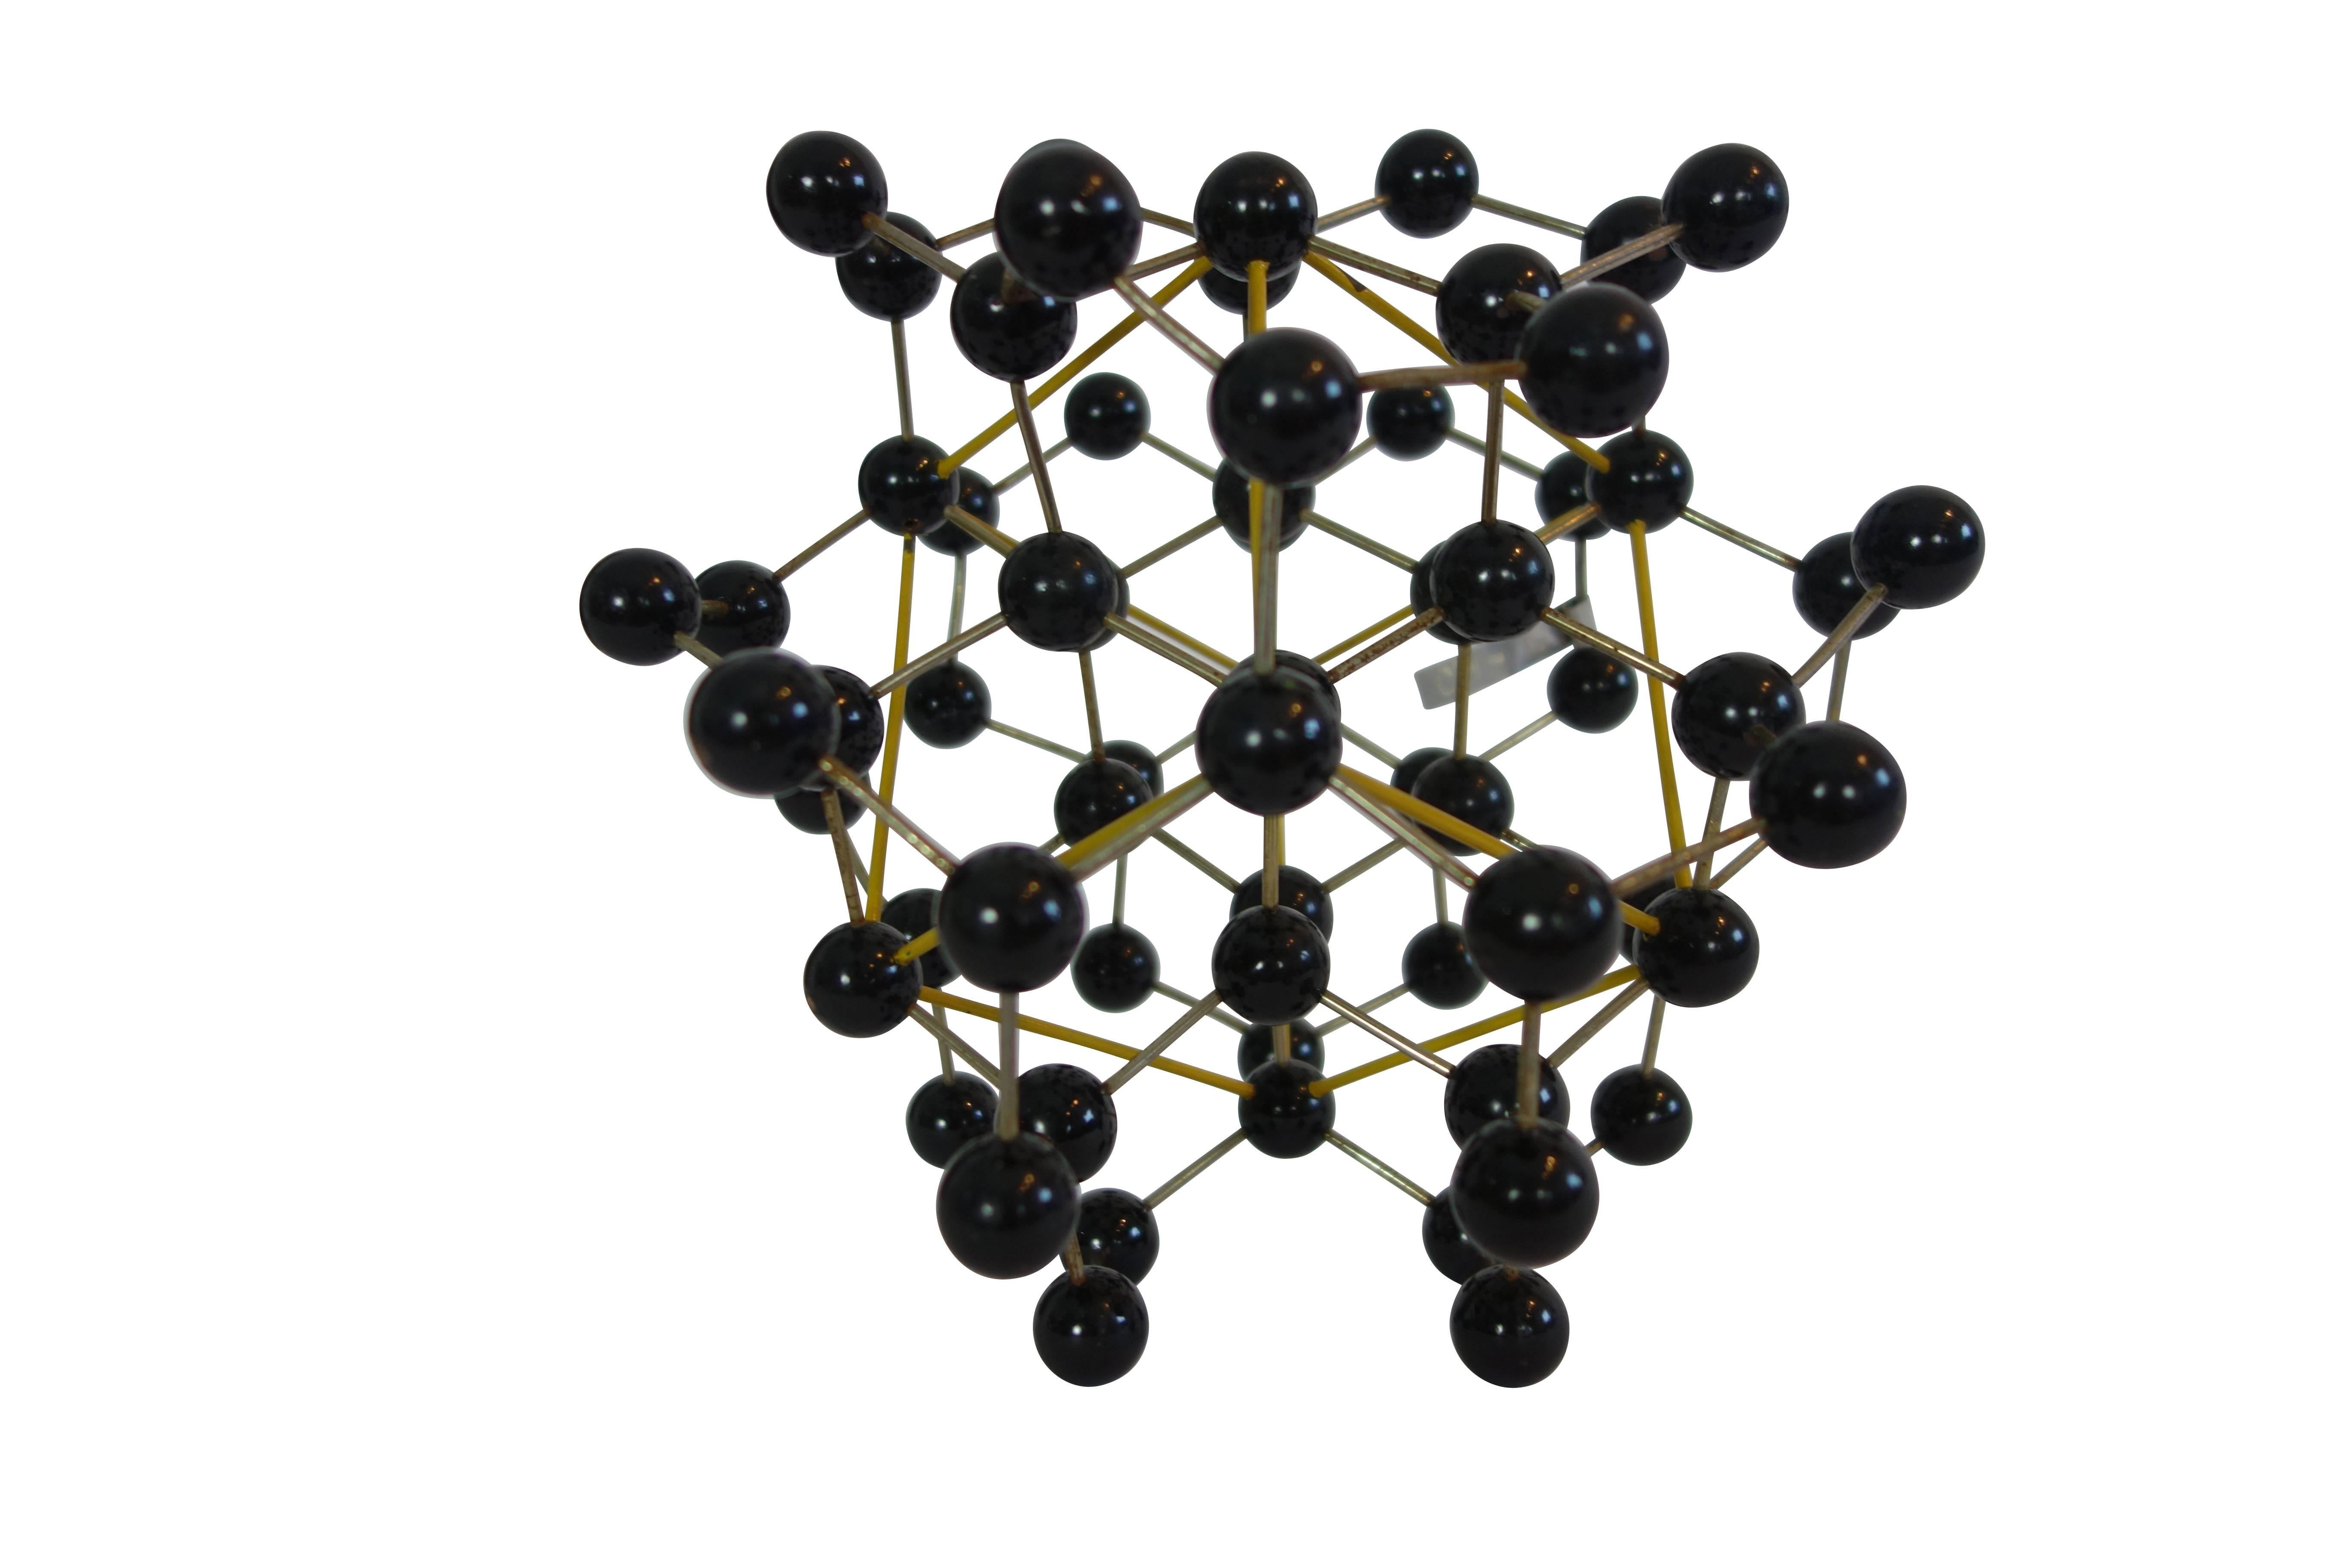 This is a 1950s molecular educational structure of a diamond from France labeled 'Diamant’.